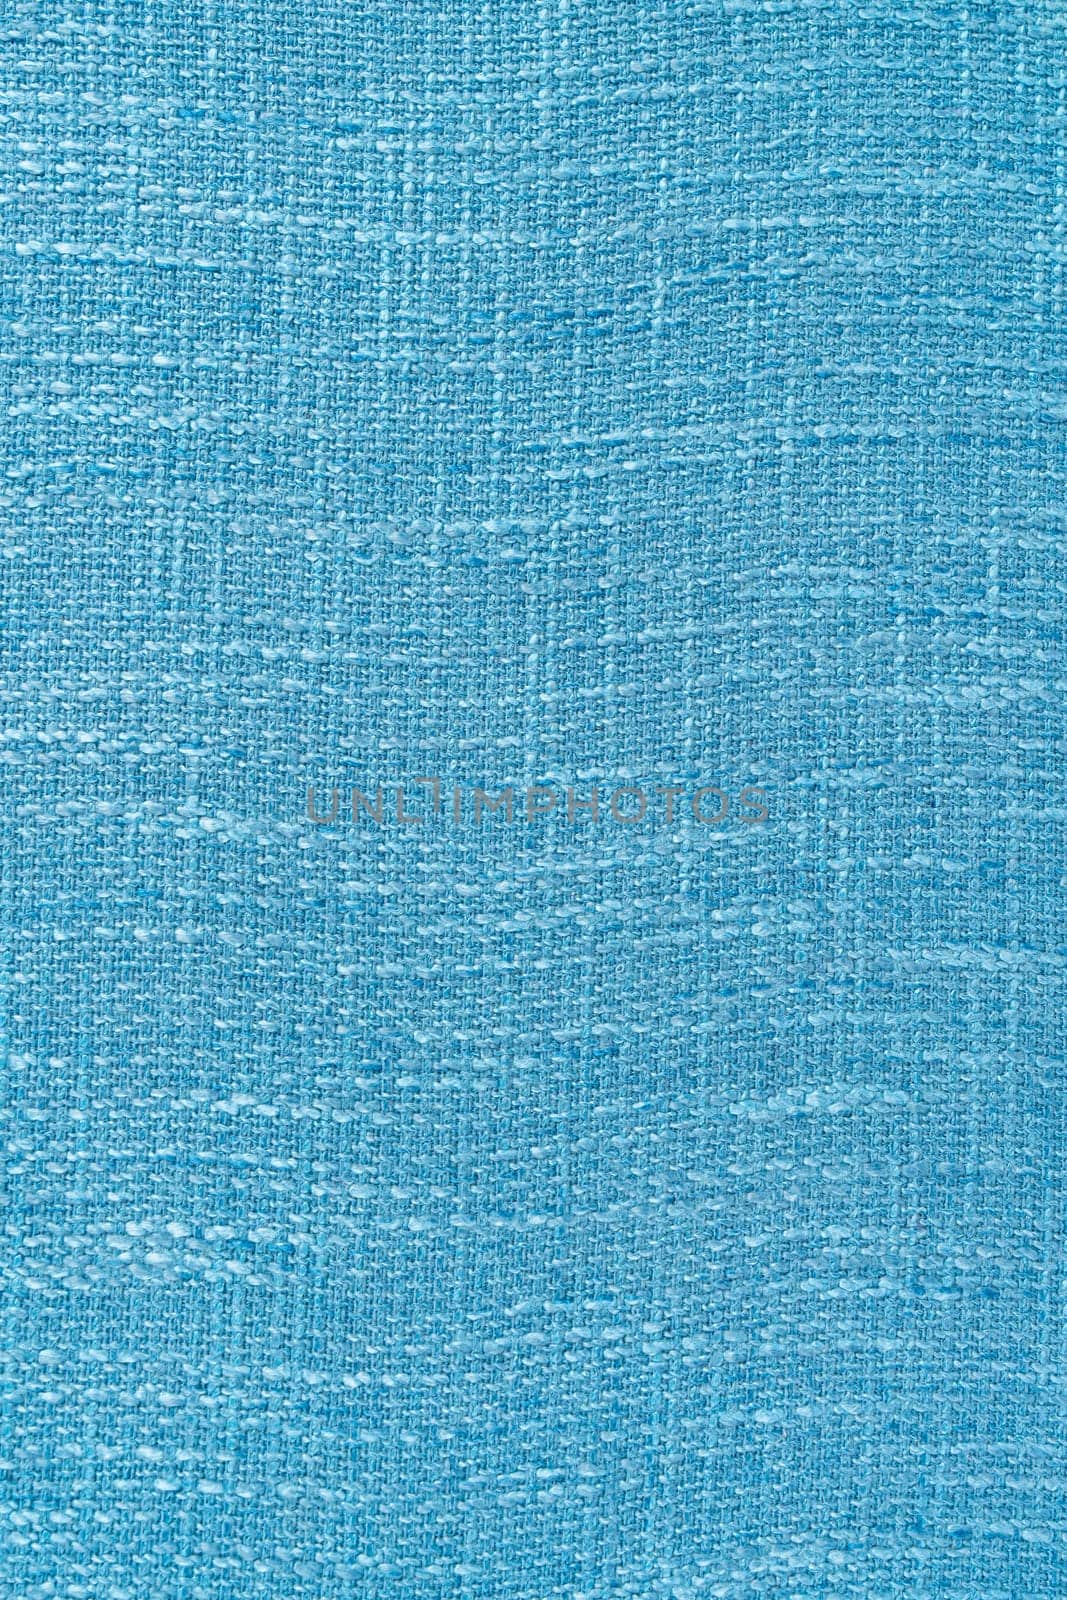 Close up shot colored light blue fabric texture as background.